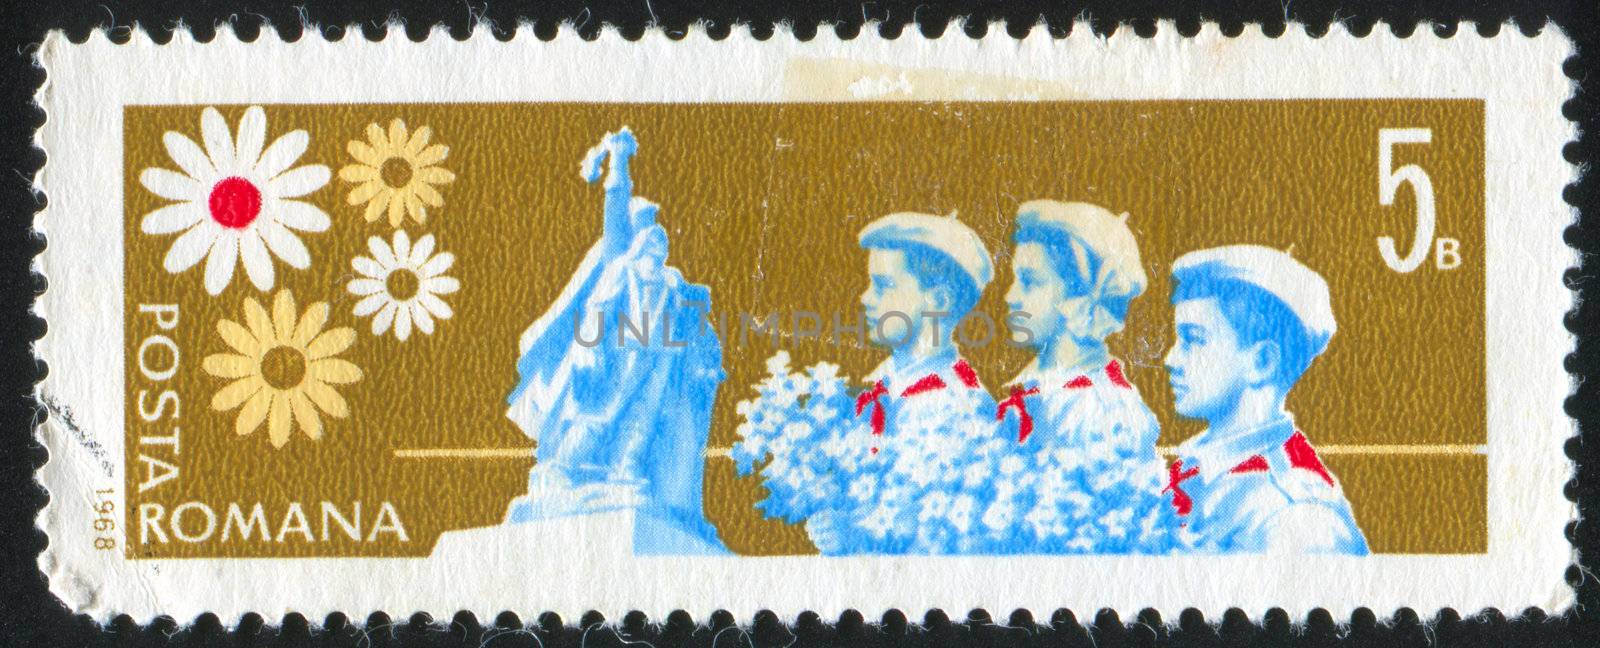 ROMANIA - CIRCA 1968: stamp printed by Romania, shows Pioneers and Liberation Monument, circa 1968